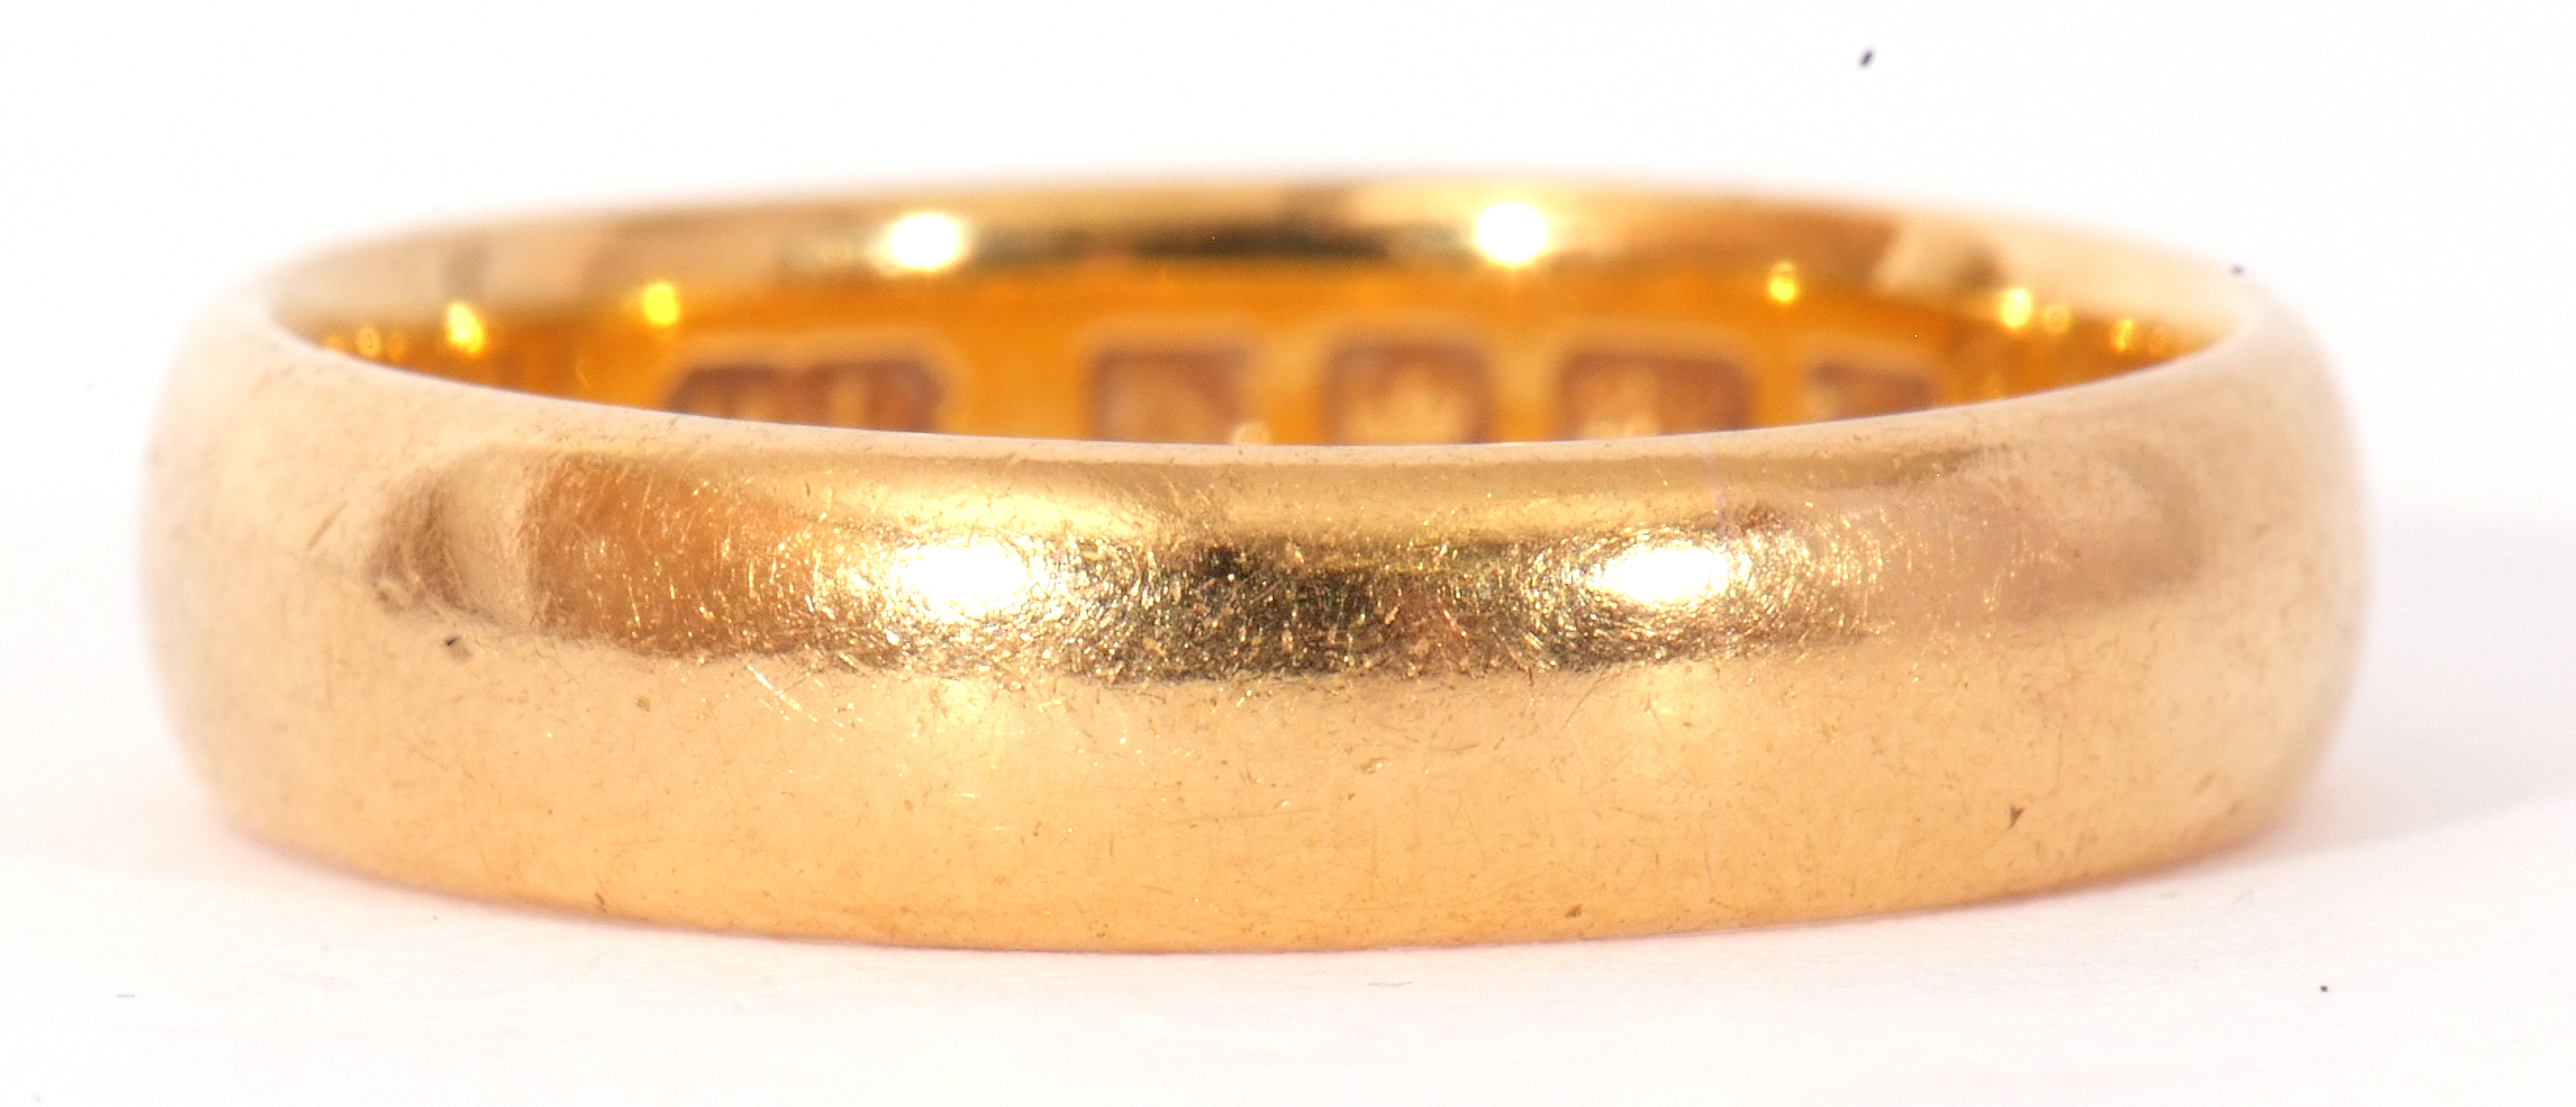 Early 20th century 22ct gold wedding ring, plain polished design, 6.7gms, London 1927, size P